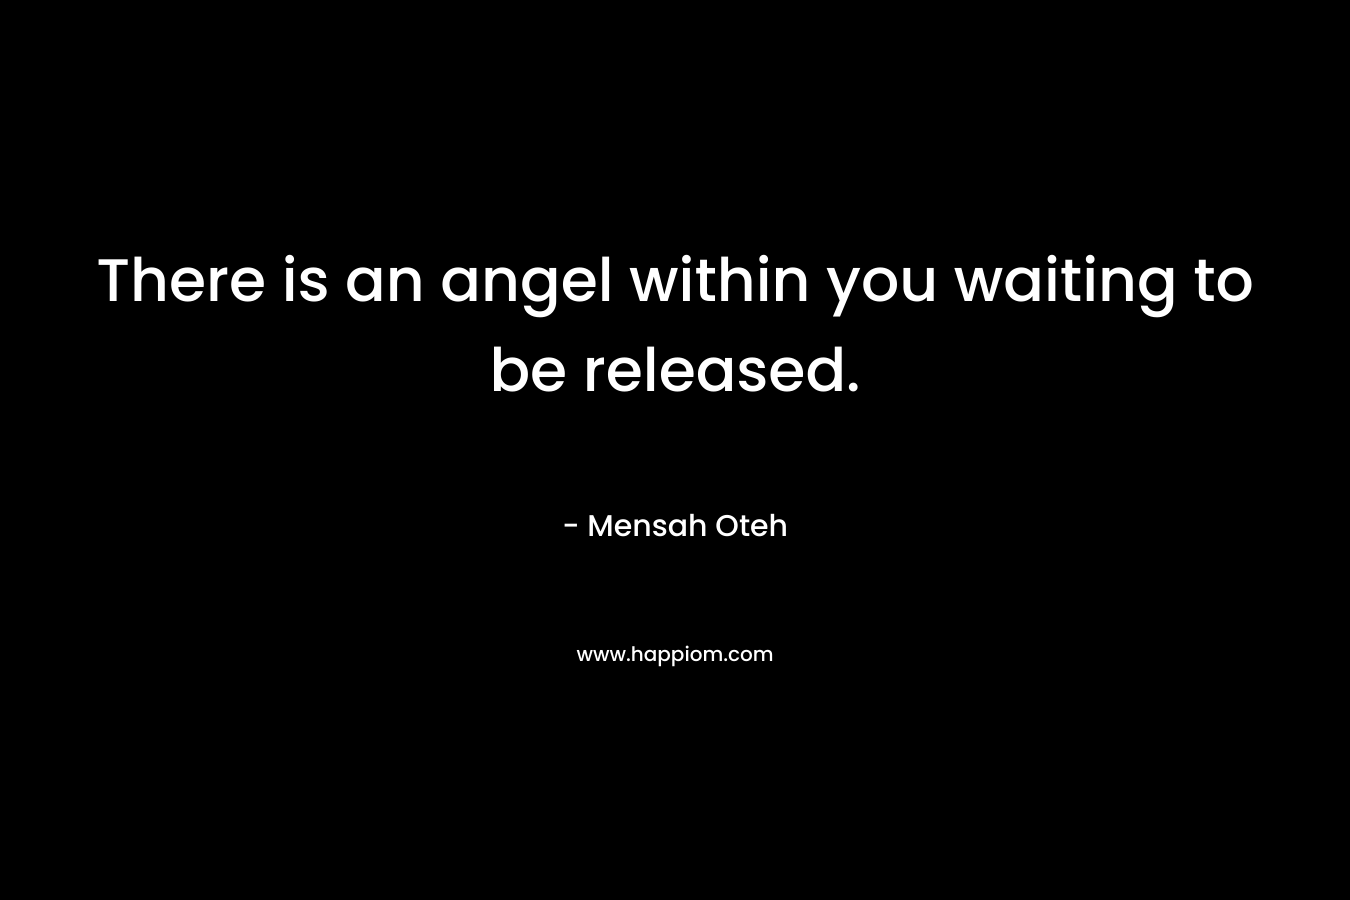 There is an angel within you waiting to be released.